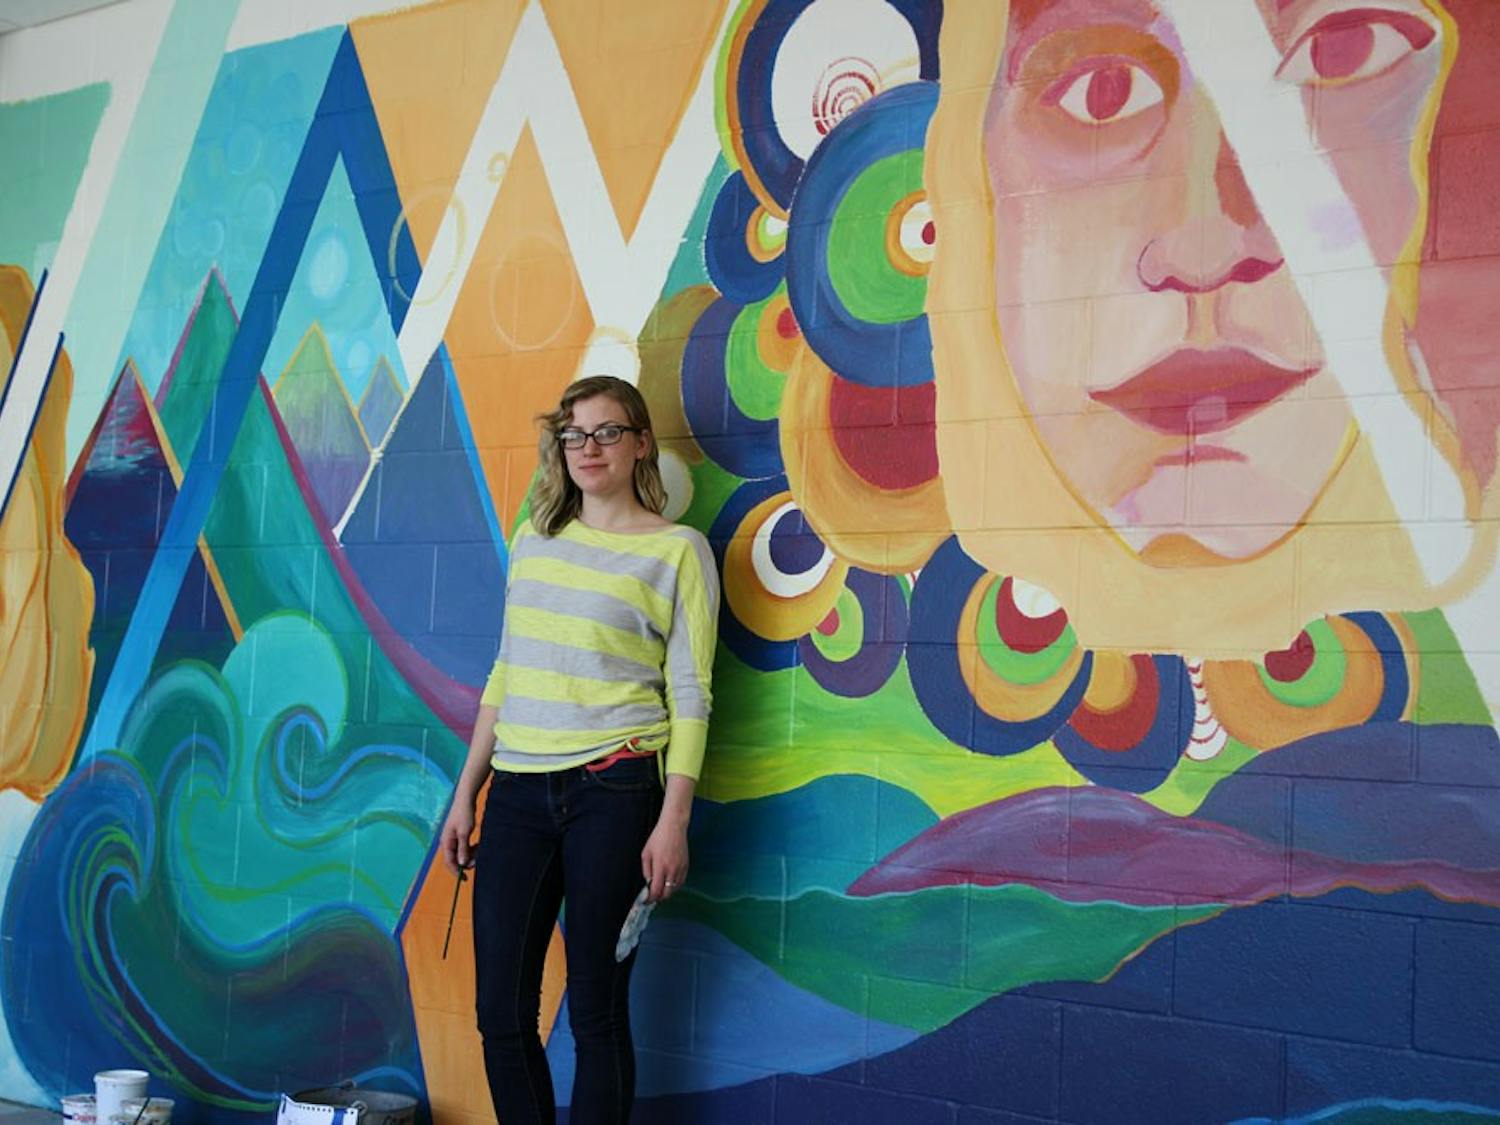 Natalie Miller, a senior fine arts major, poses by her near-completed final project for Thematic Drawing. Her mural on the CFA wall depicts two faces, one blue and one red, in an exploration of self-identity and the multiple sides of an individual’s inner reality.